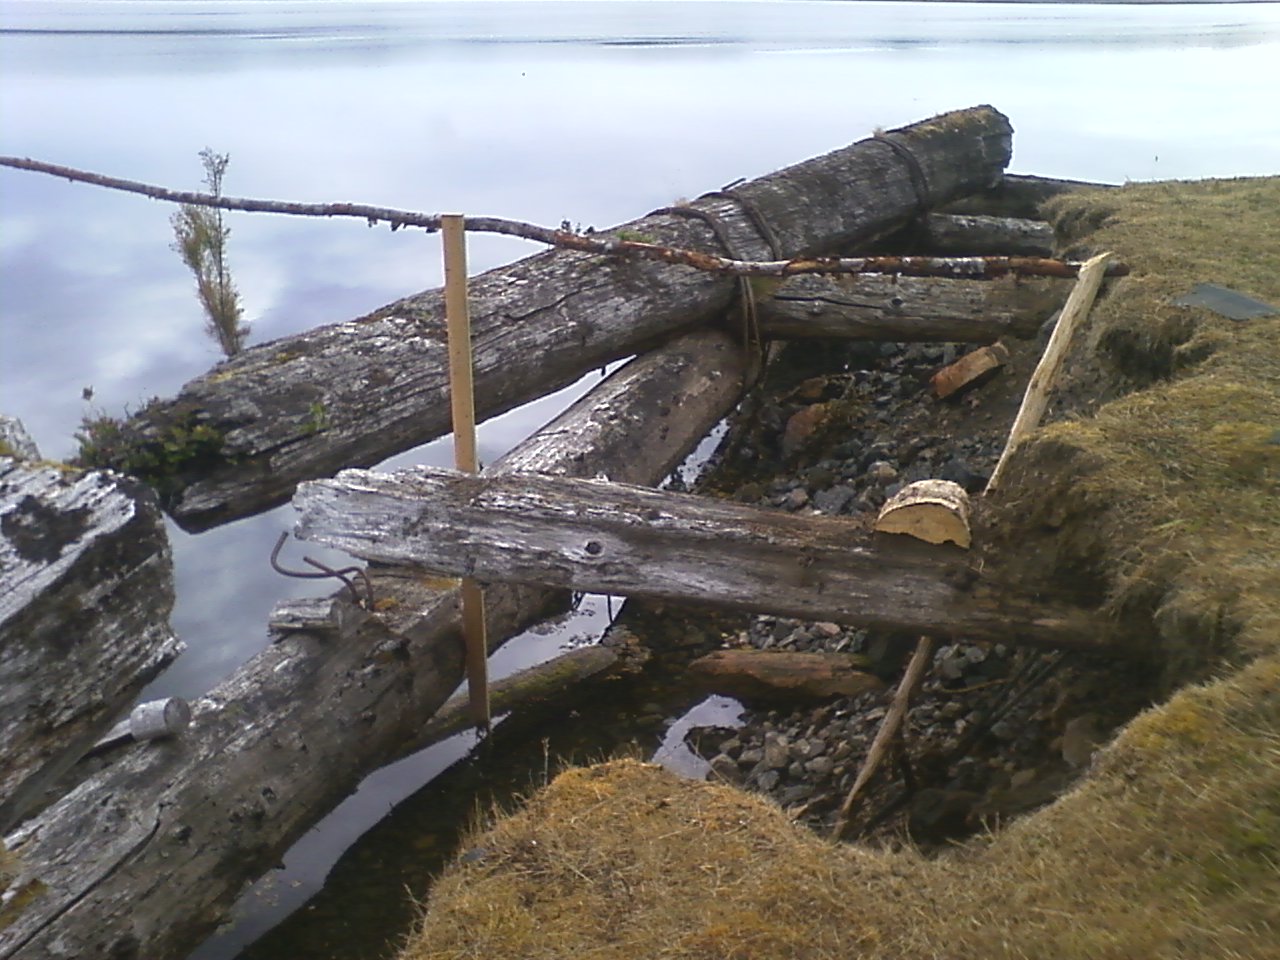 Protruding driftwood